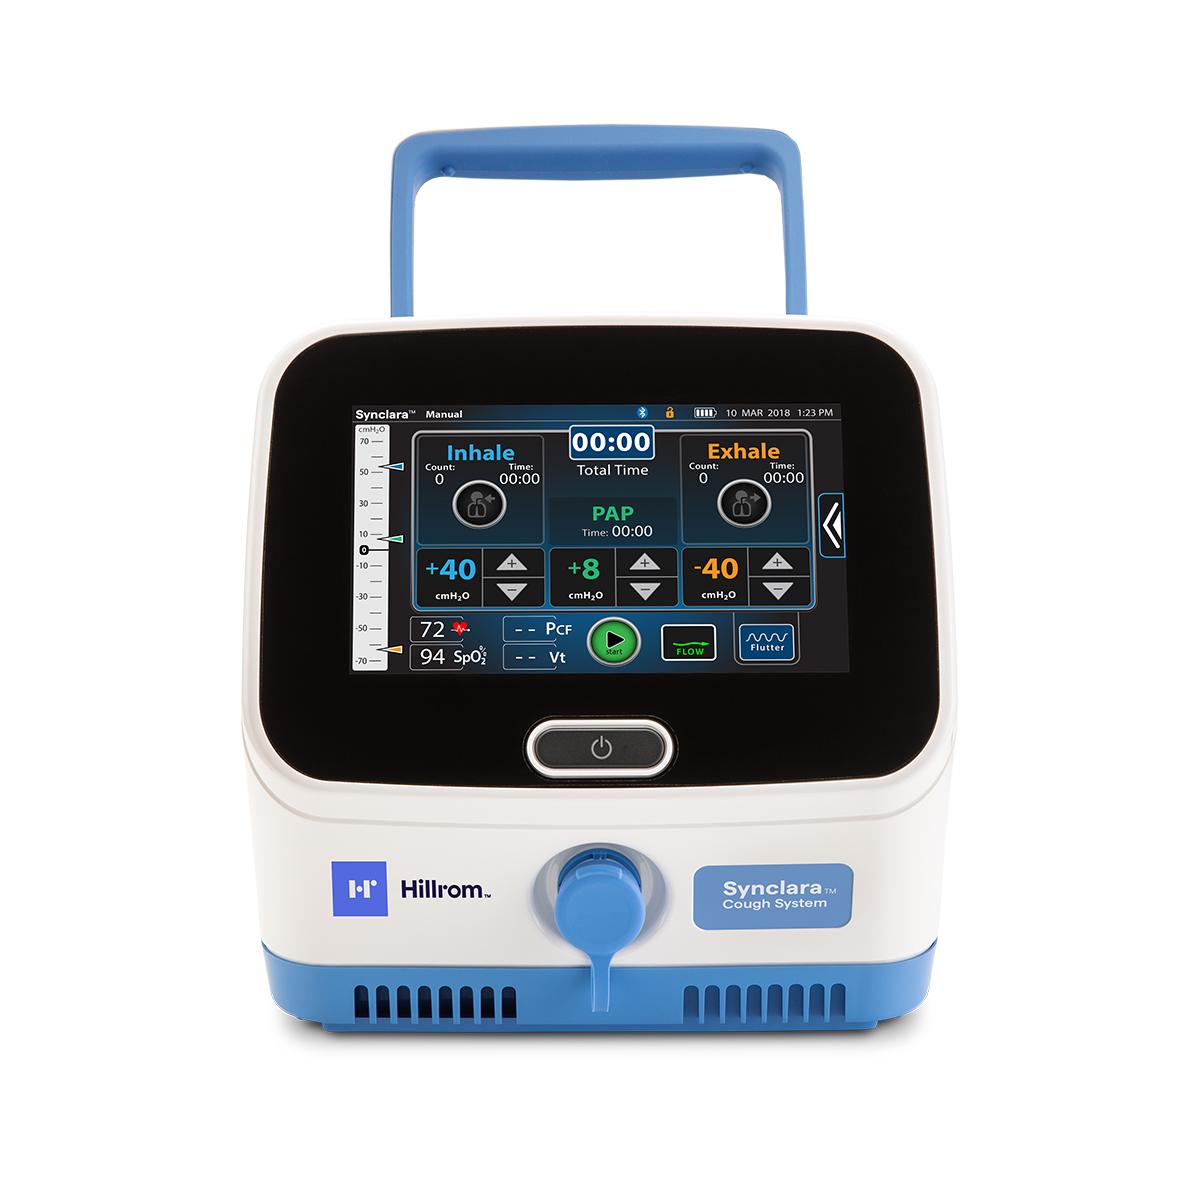 Front view of the Synclara Cough System controller with screen displaying information and controls.